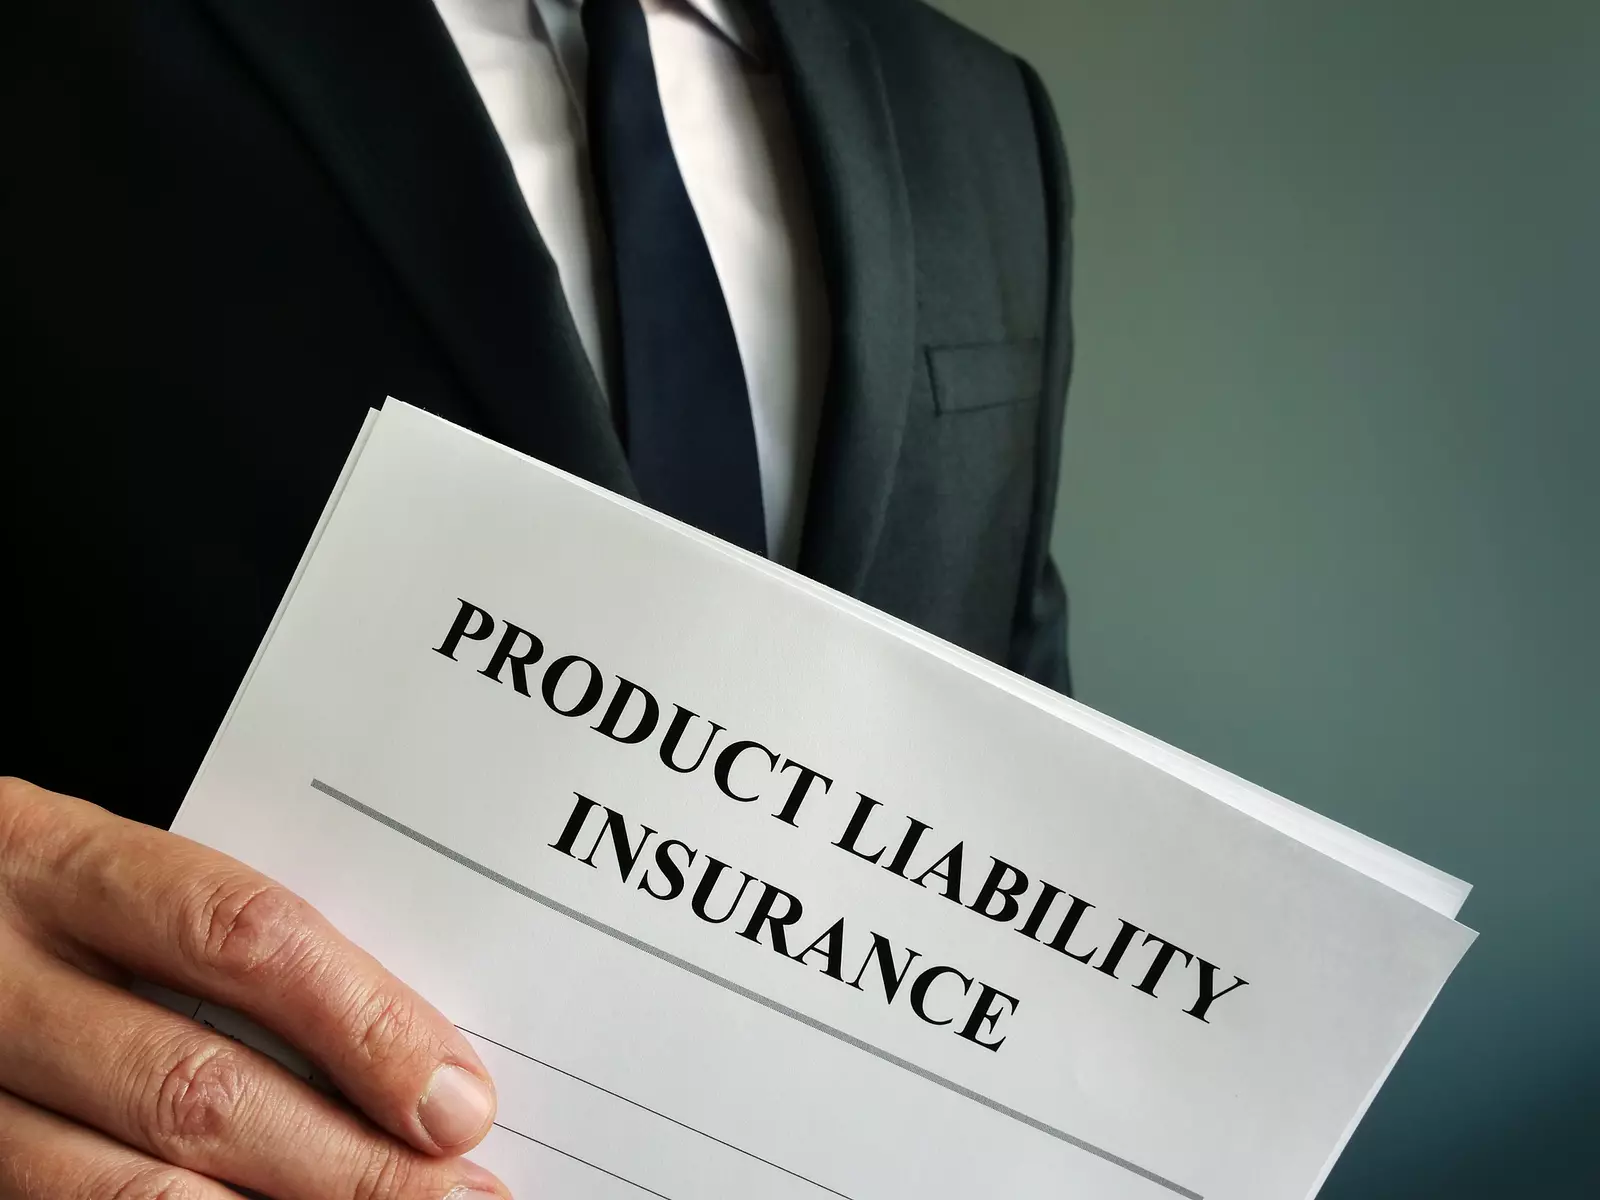 Filing a Product Liability Claim Might Be an Option if You Have Been Injured by a Dangerous or Defective Product